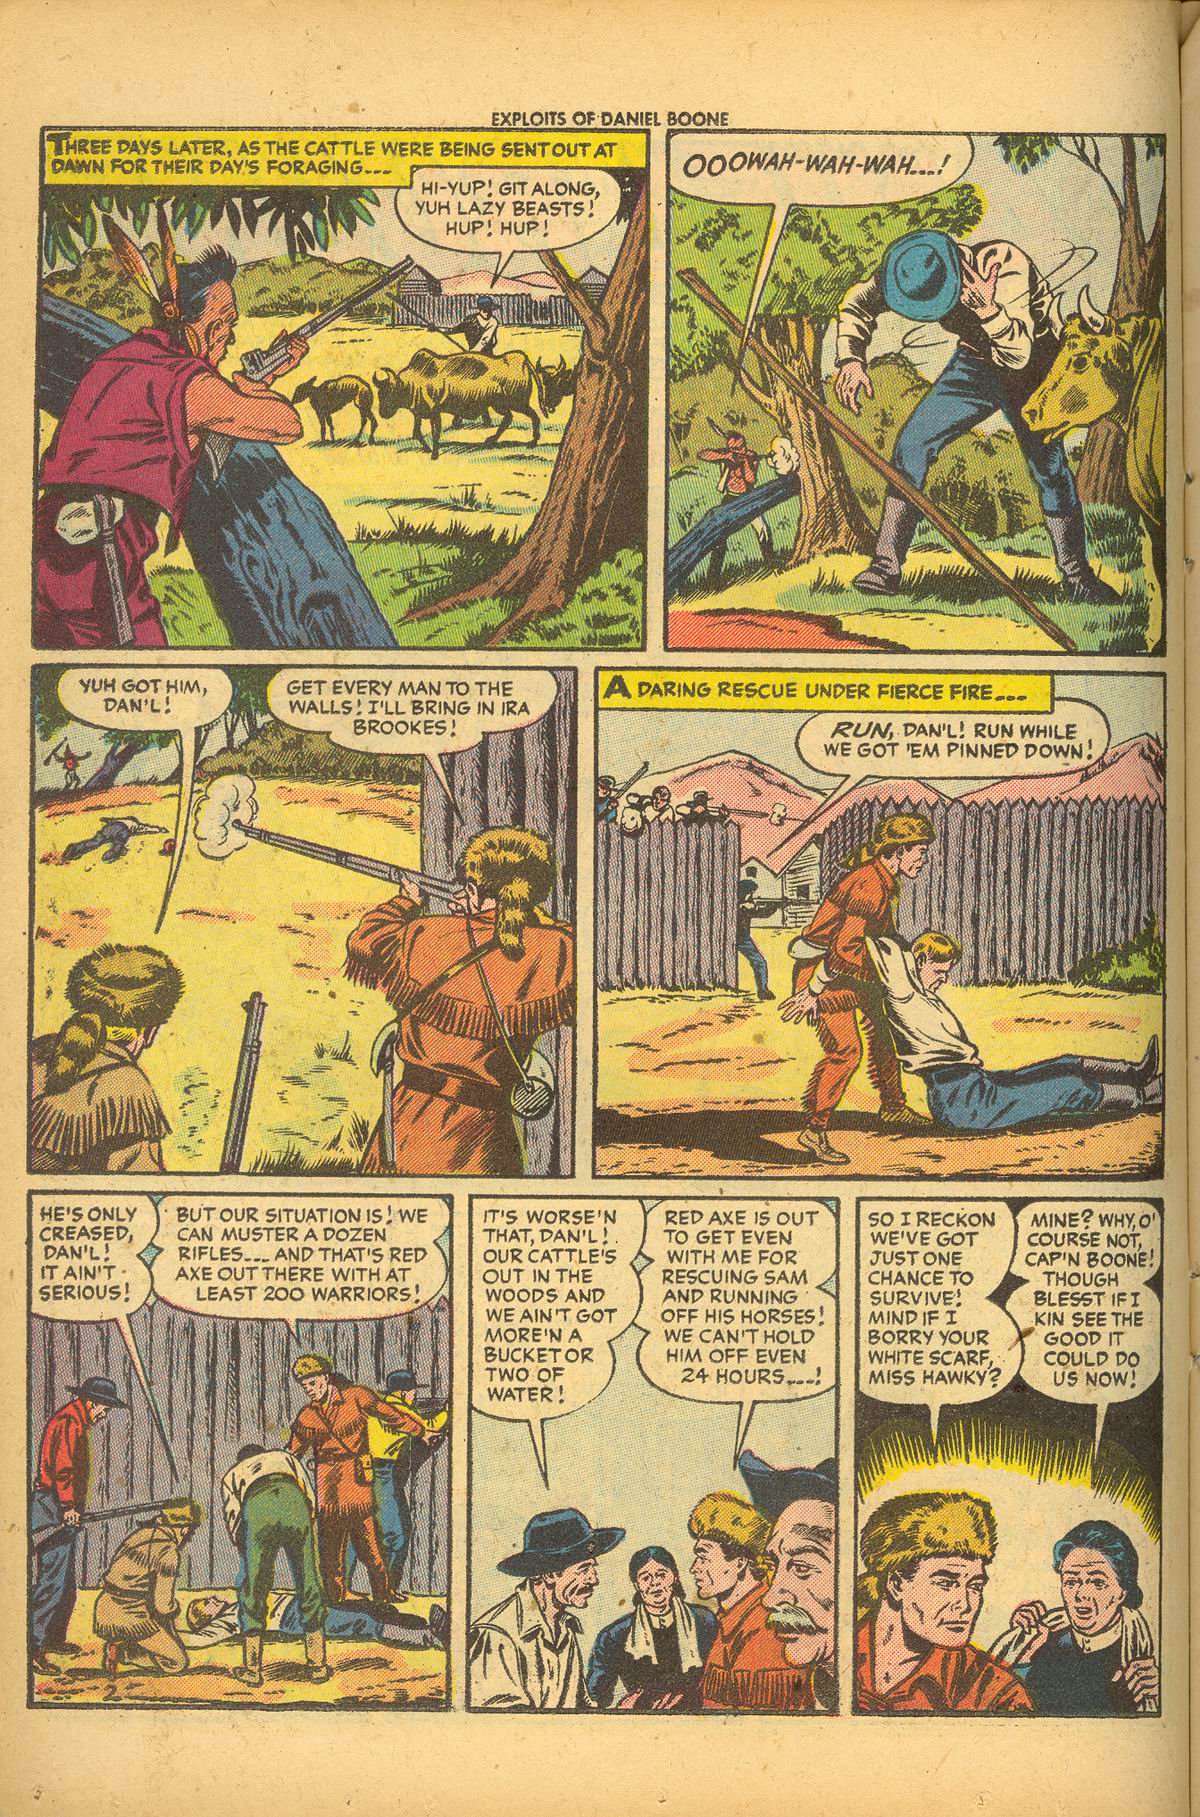 Read online Exploits of Daniel Boone comic -  Issue #2 - 14